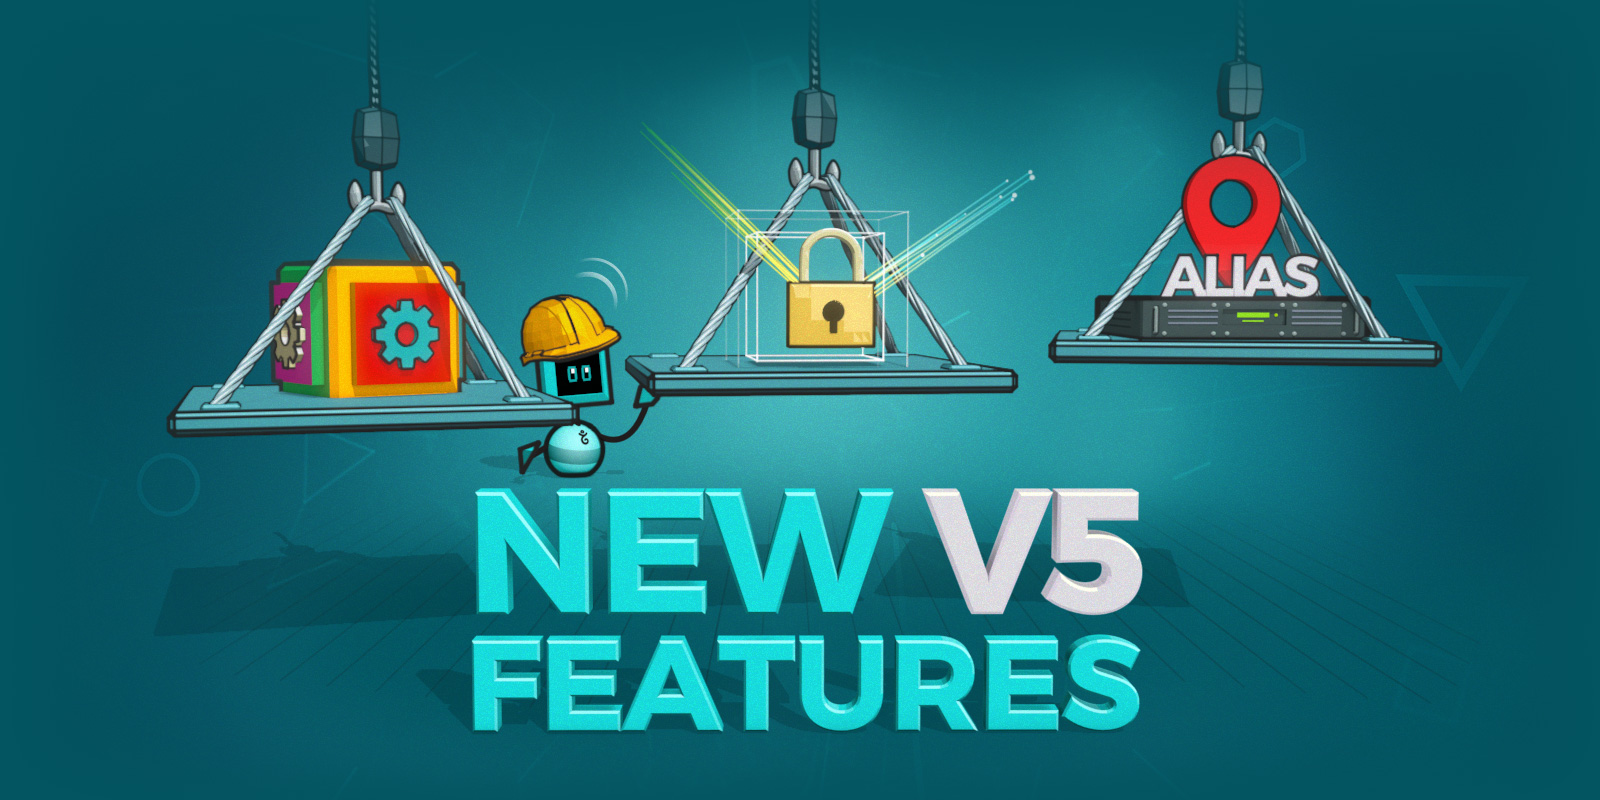 An even more robust v5 with the addition of three new features!